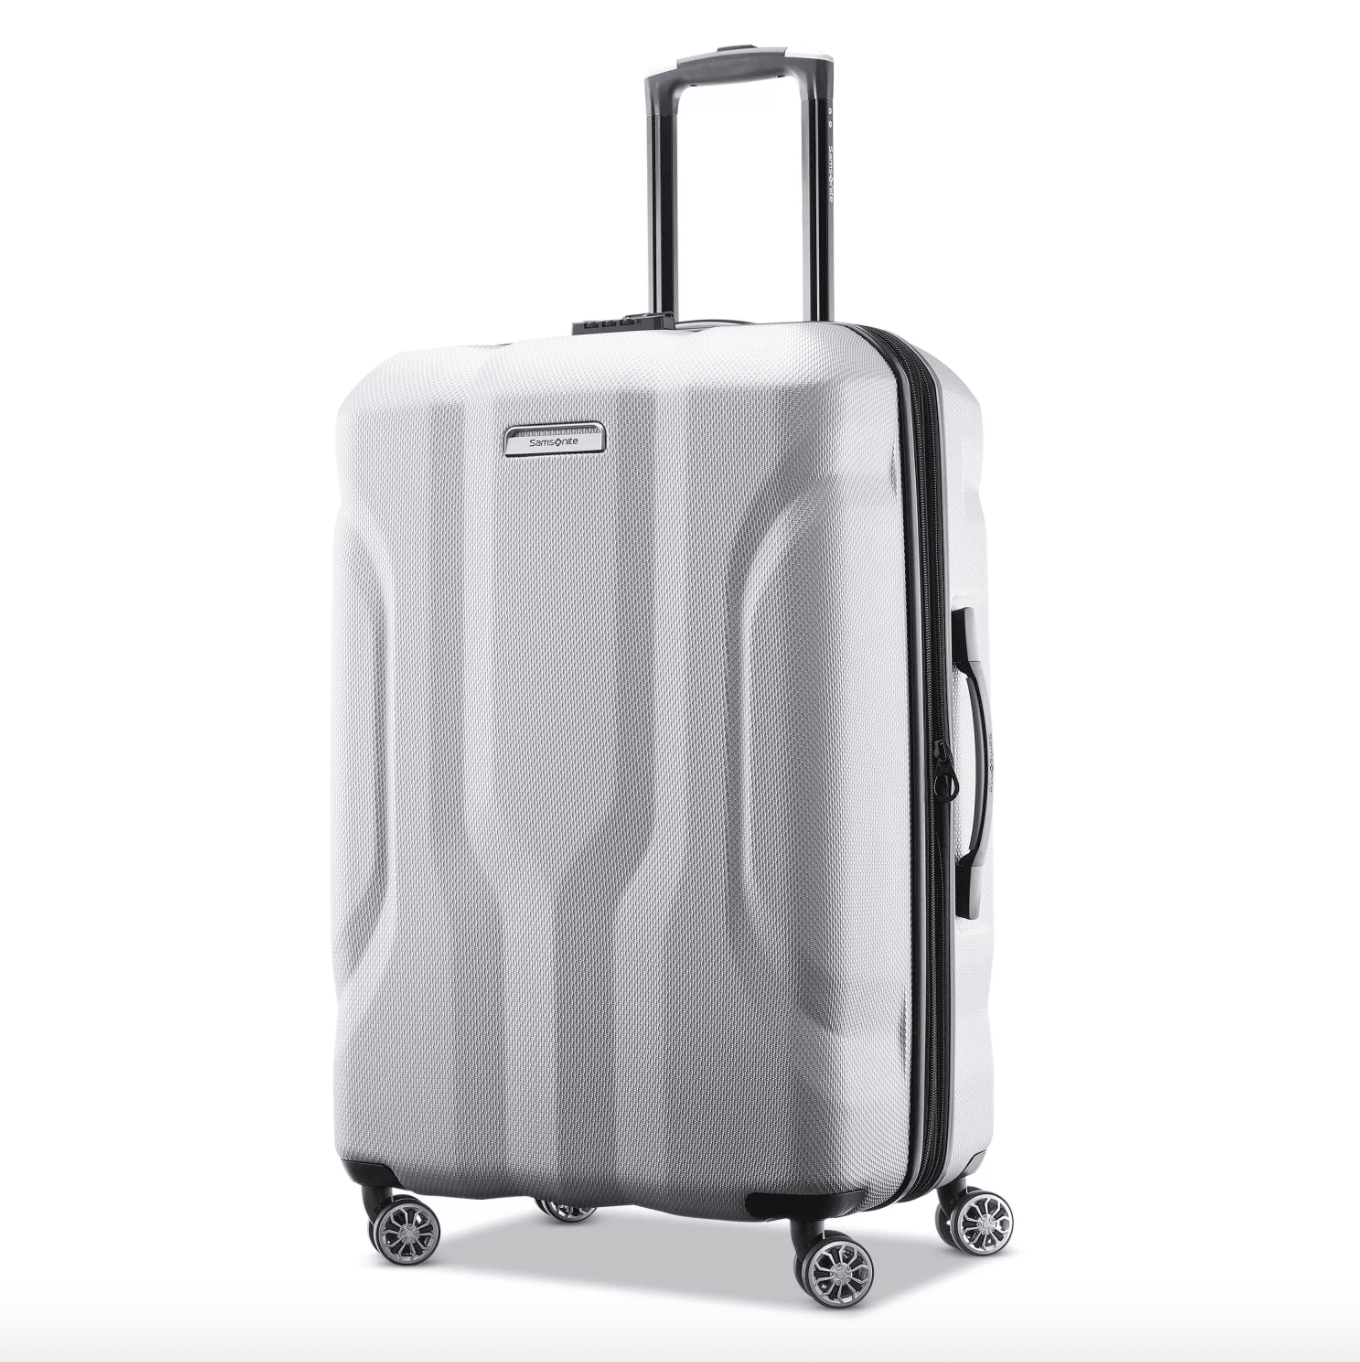 Best luggage deal: get Samsonite and American Tourister luggage